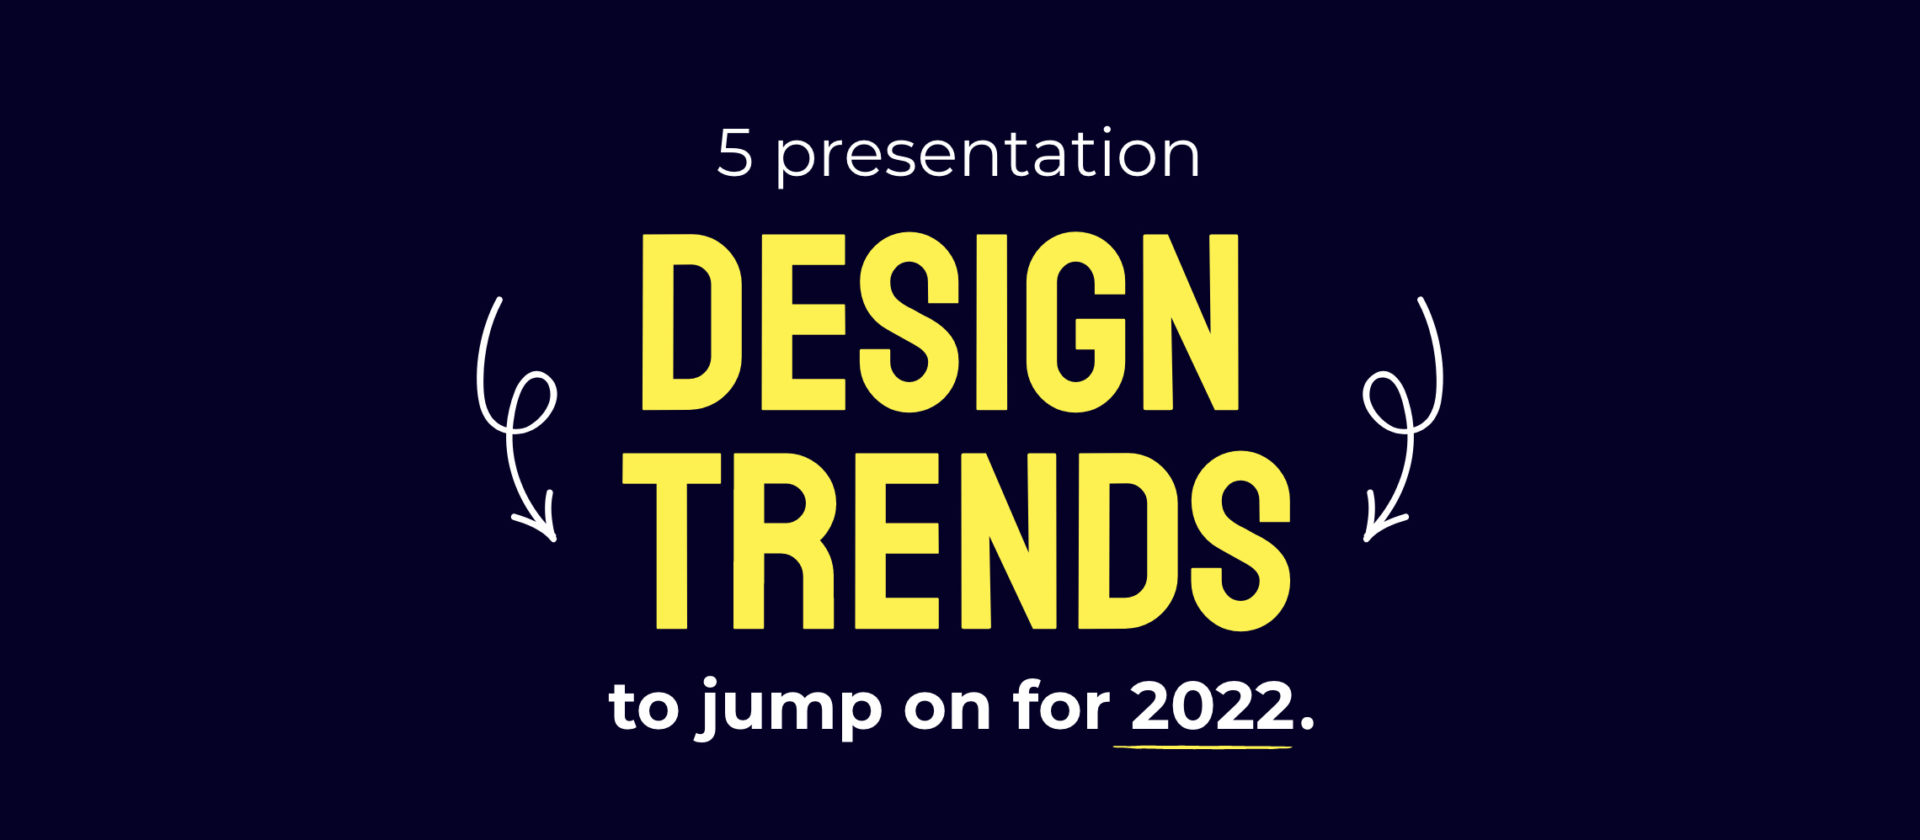 5 presentation design trends to jump on for 2022.